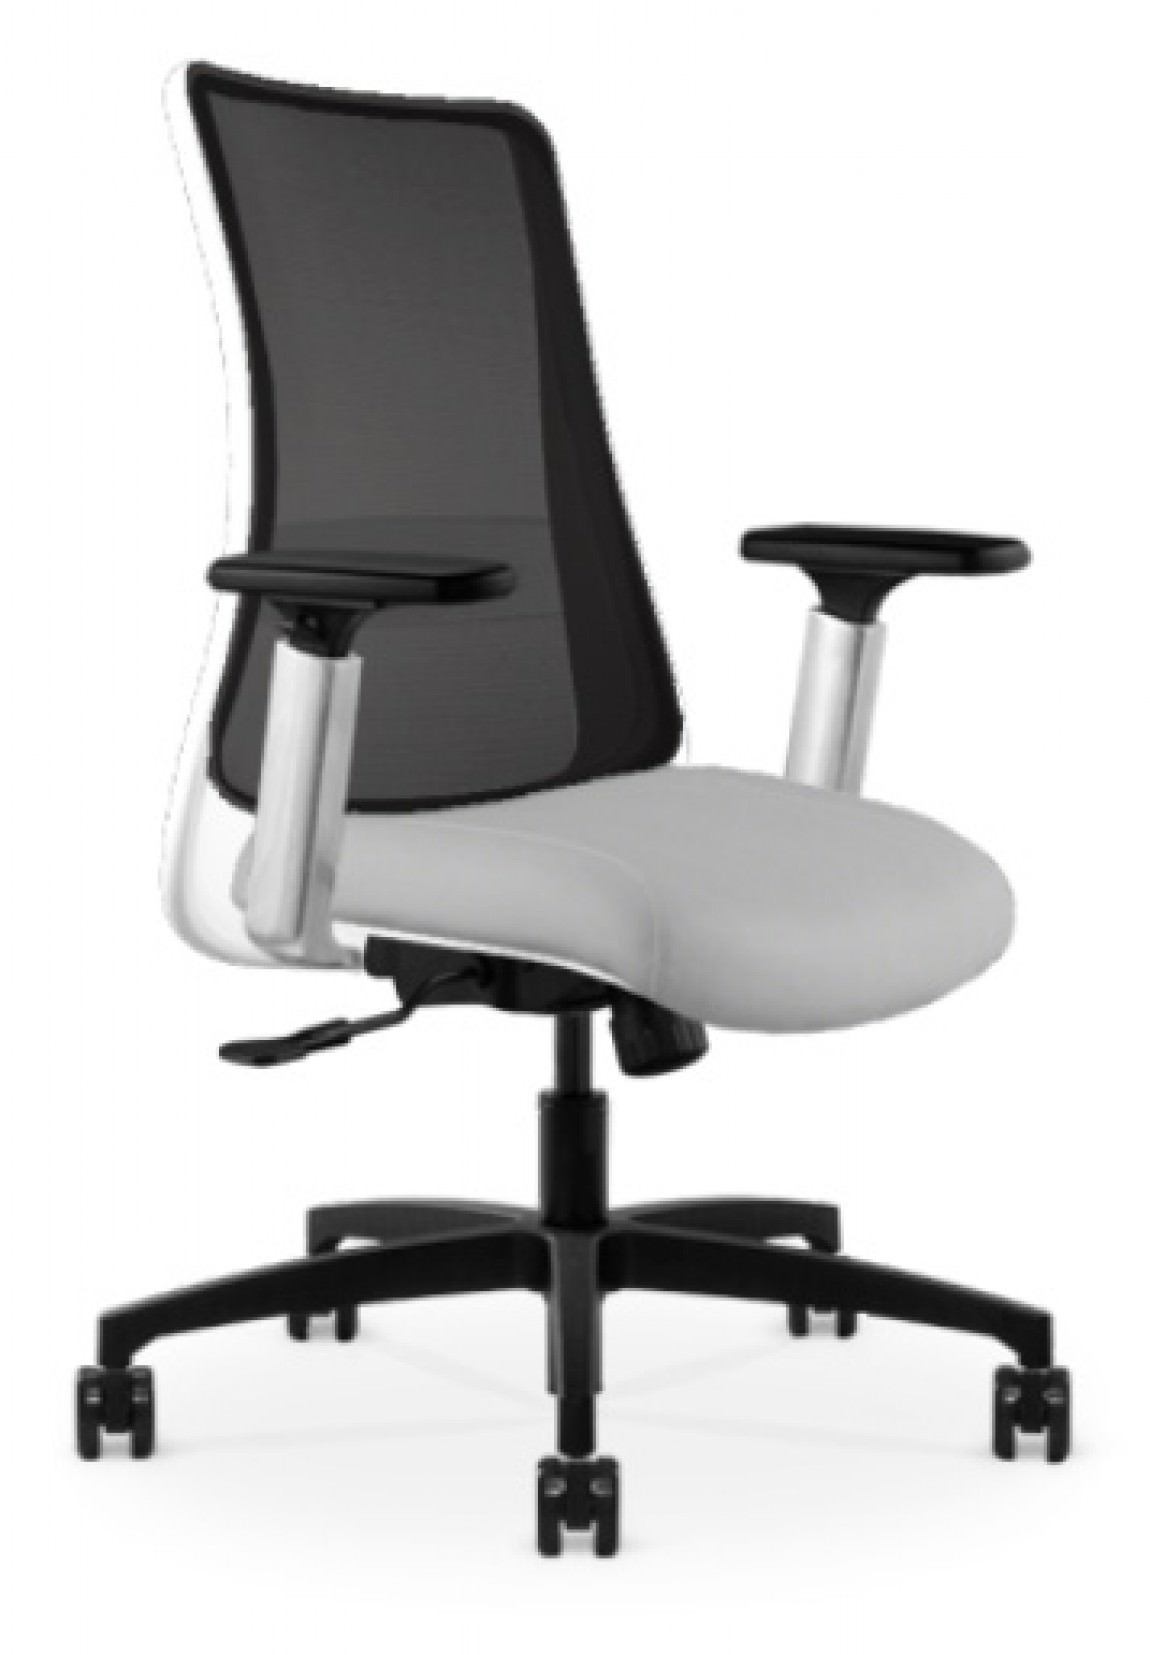 Genie Copper Mesh Antimicrobial Office Chair with Lumbar Support - Staple Mist